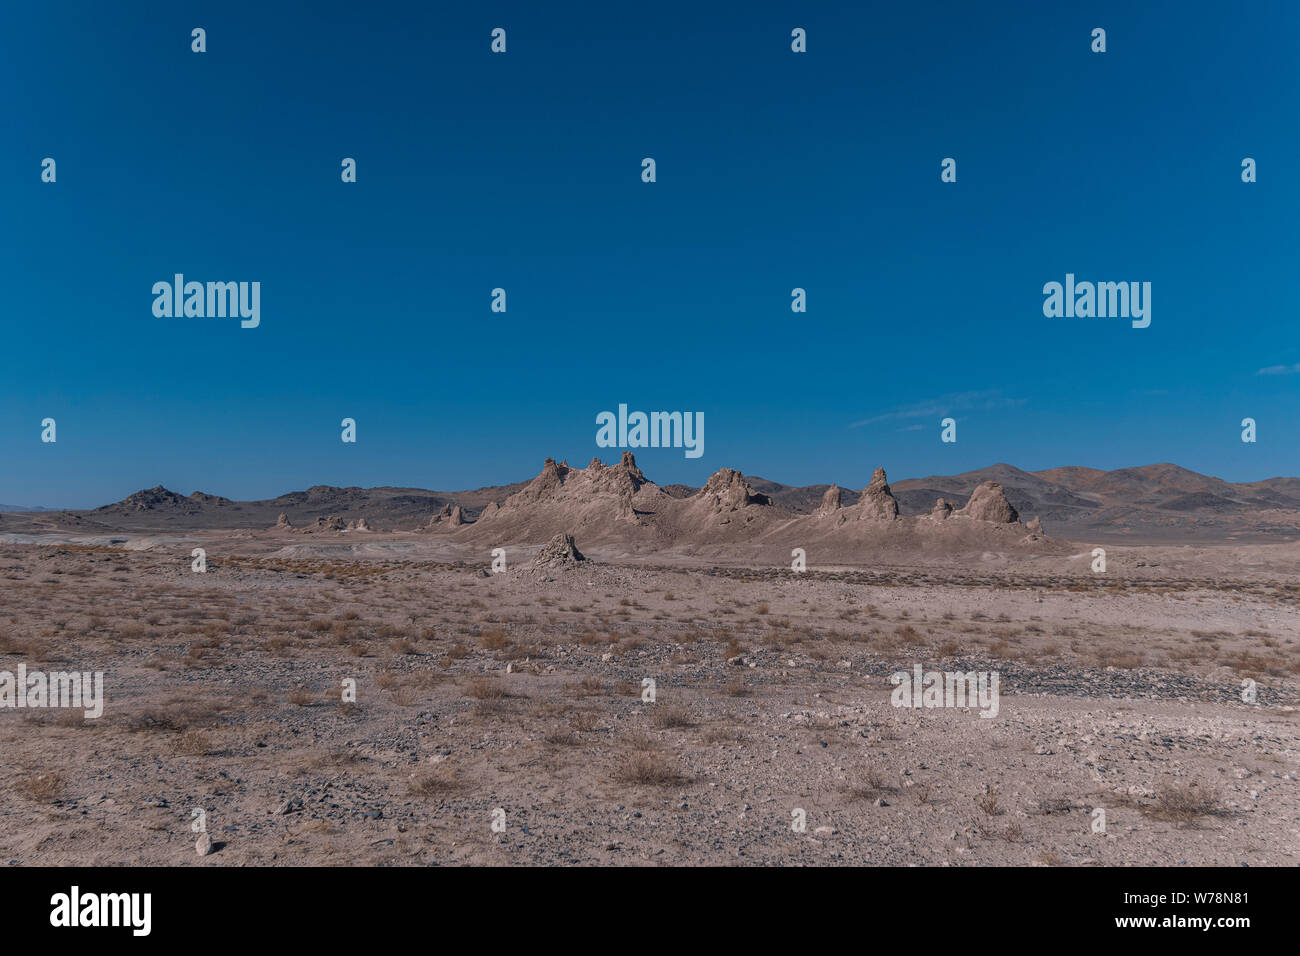 Sparse vegetation in vast desert with jagged hills and rock formations under bright blue sky. Stock Photo